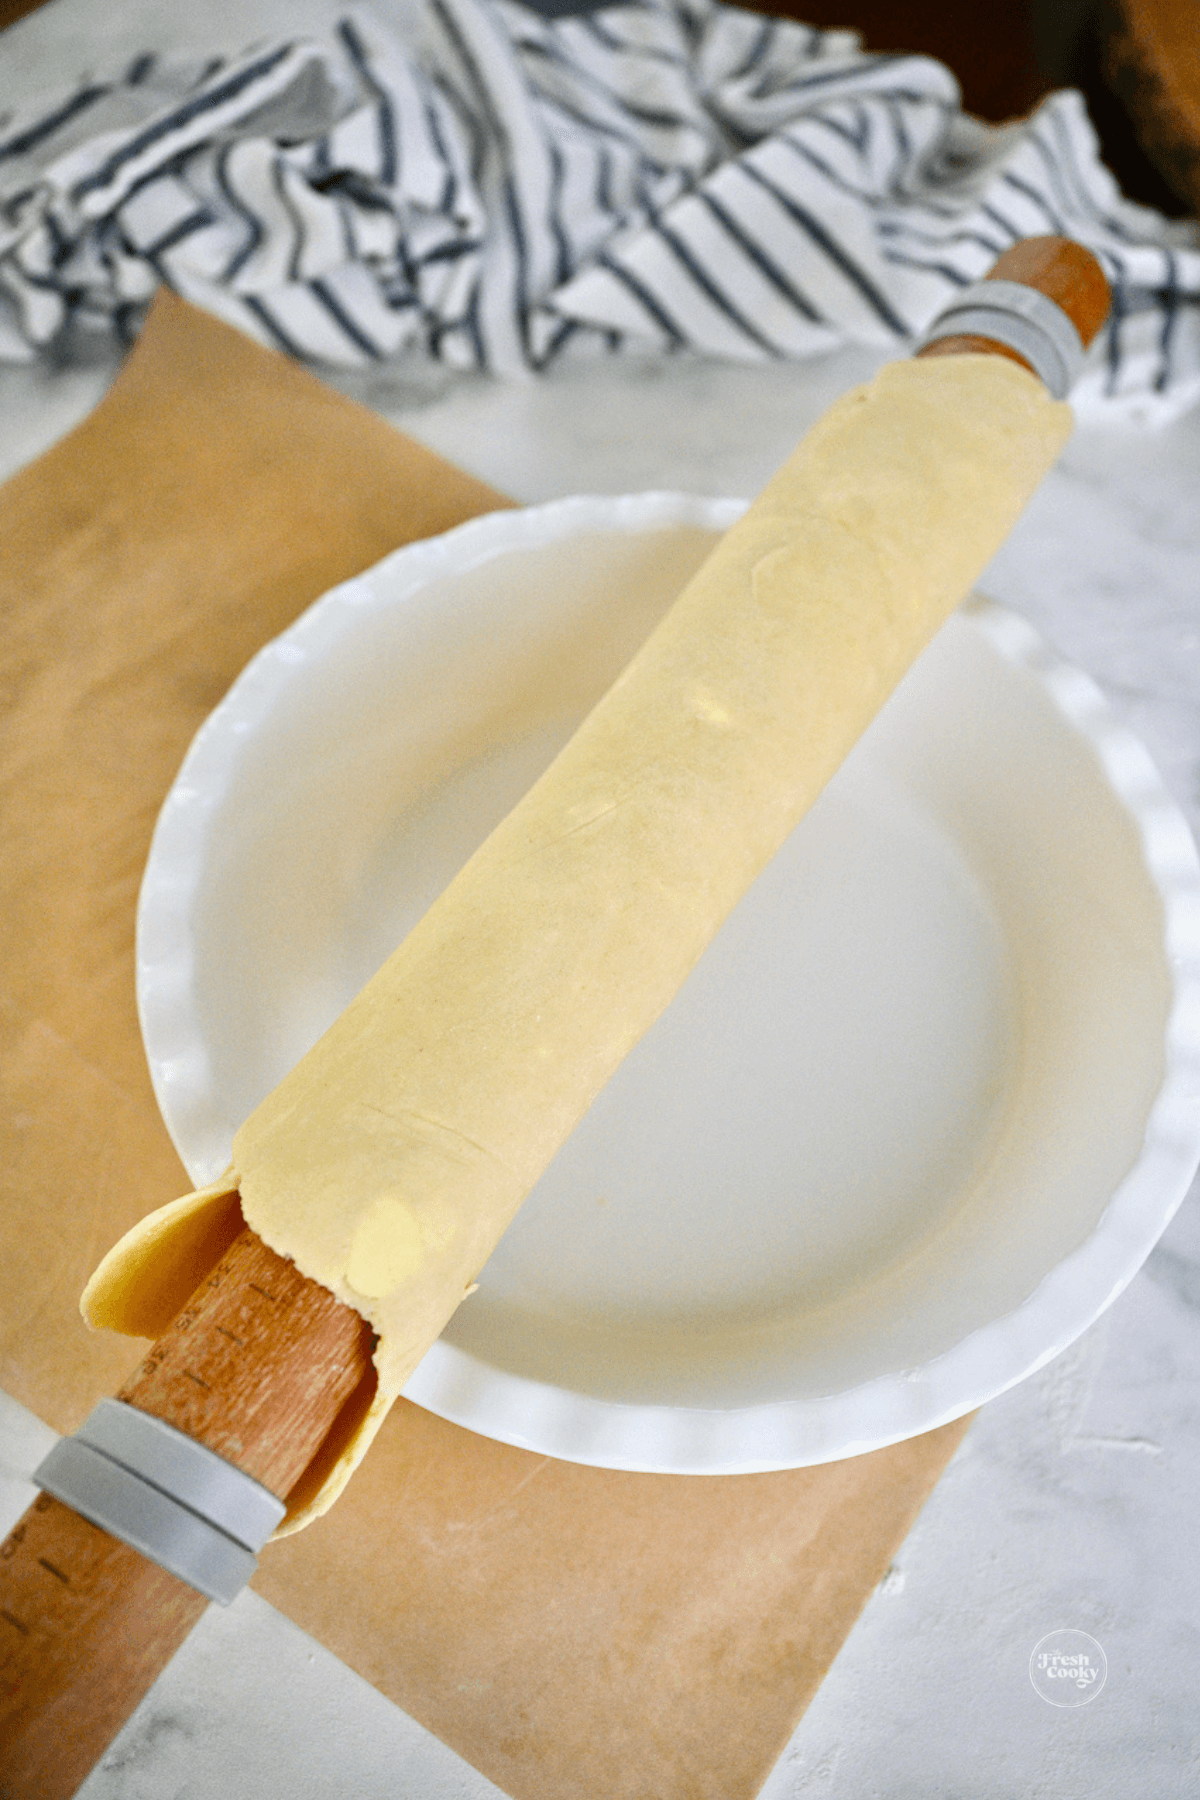 Using rolling pin to roll pie dough onto plate.